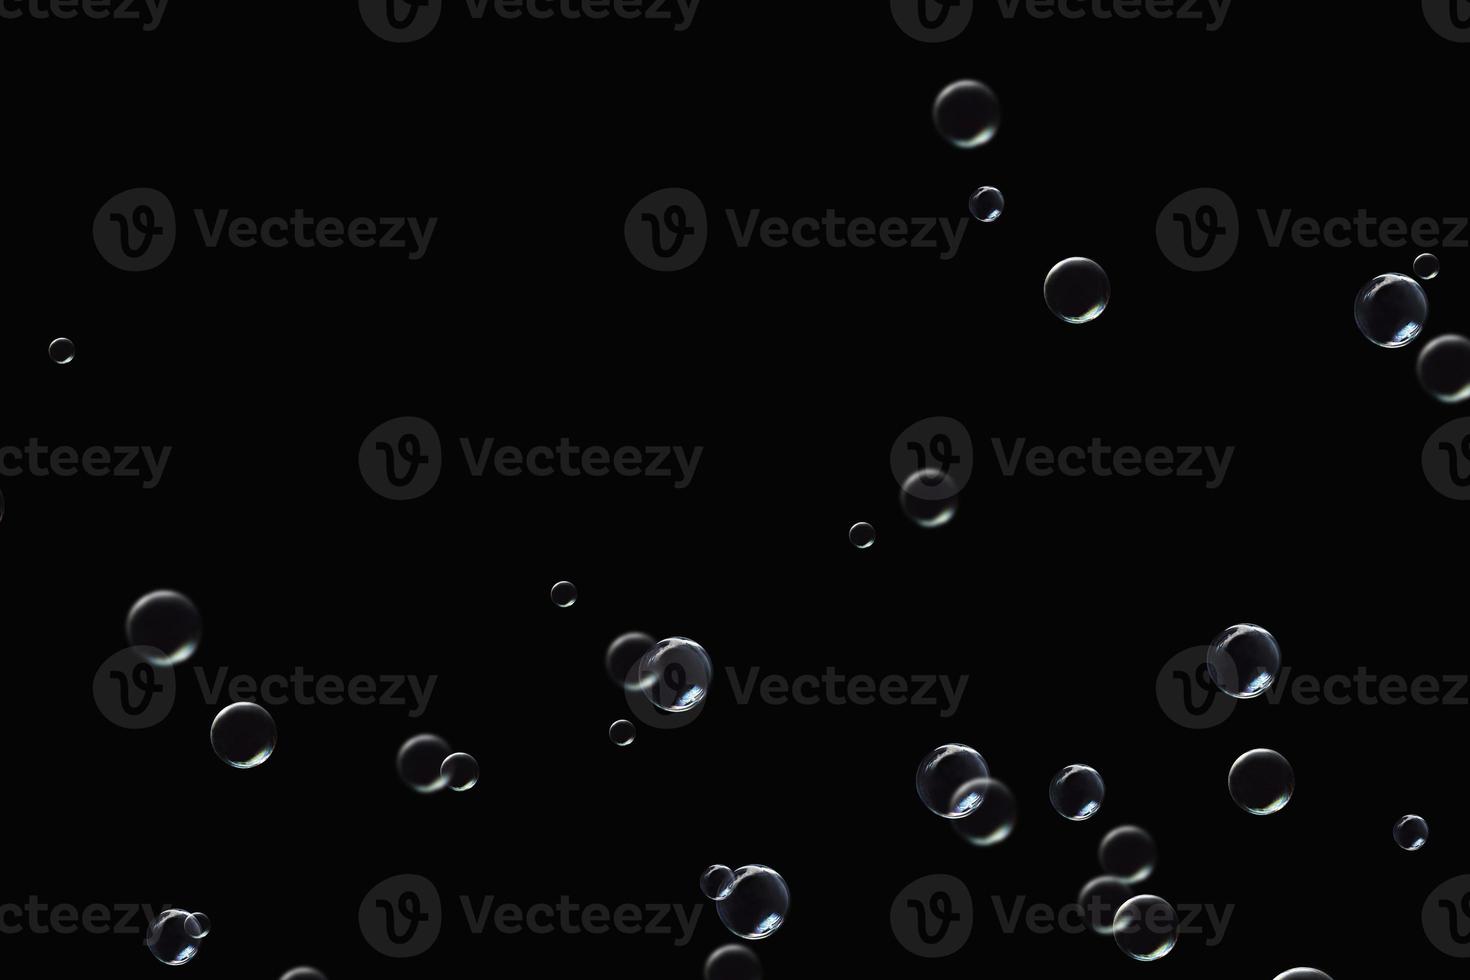 transparent bubbles soap pattern overlay abstract particles splashes of water on black. photo